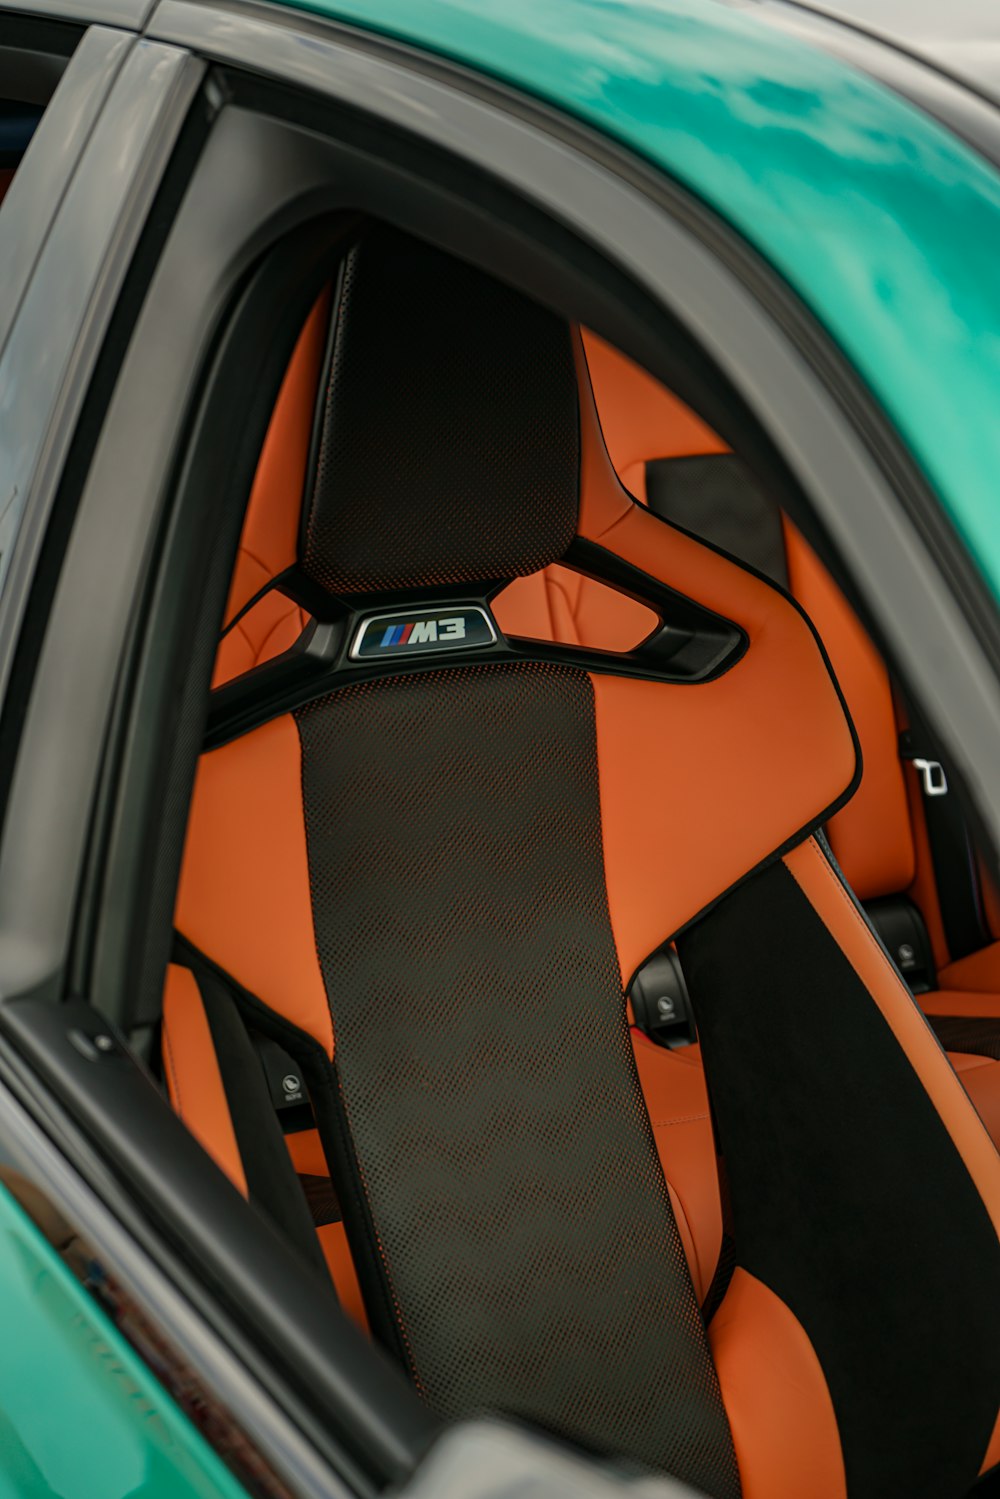 the interior of a sports car with orange and black seats